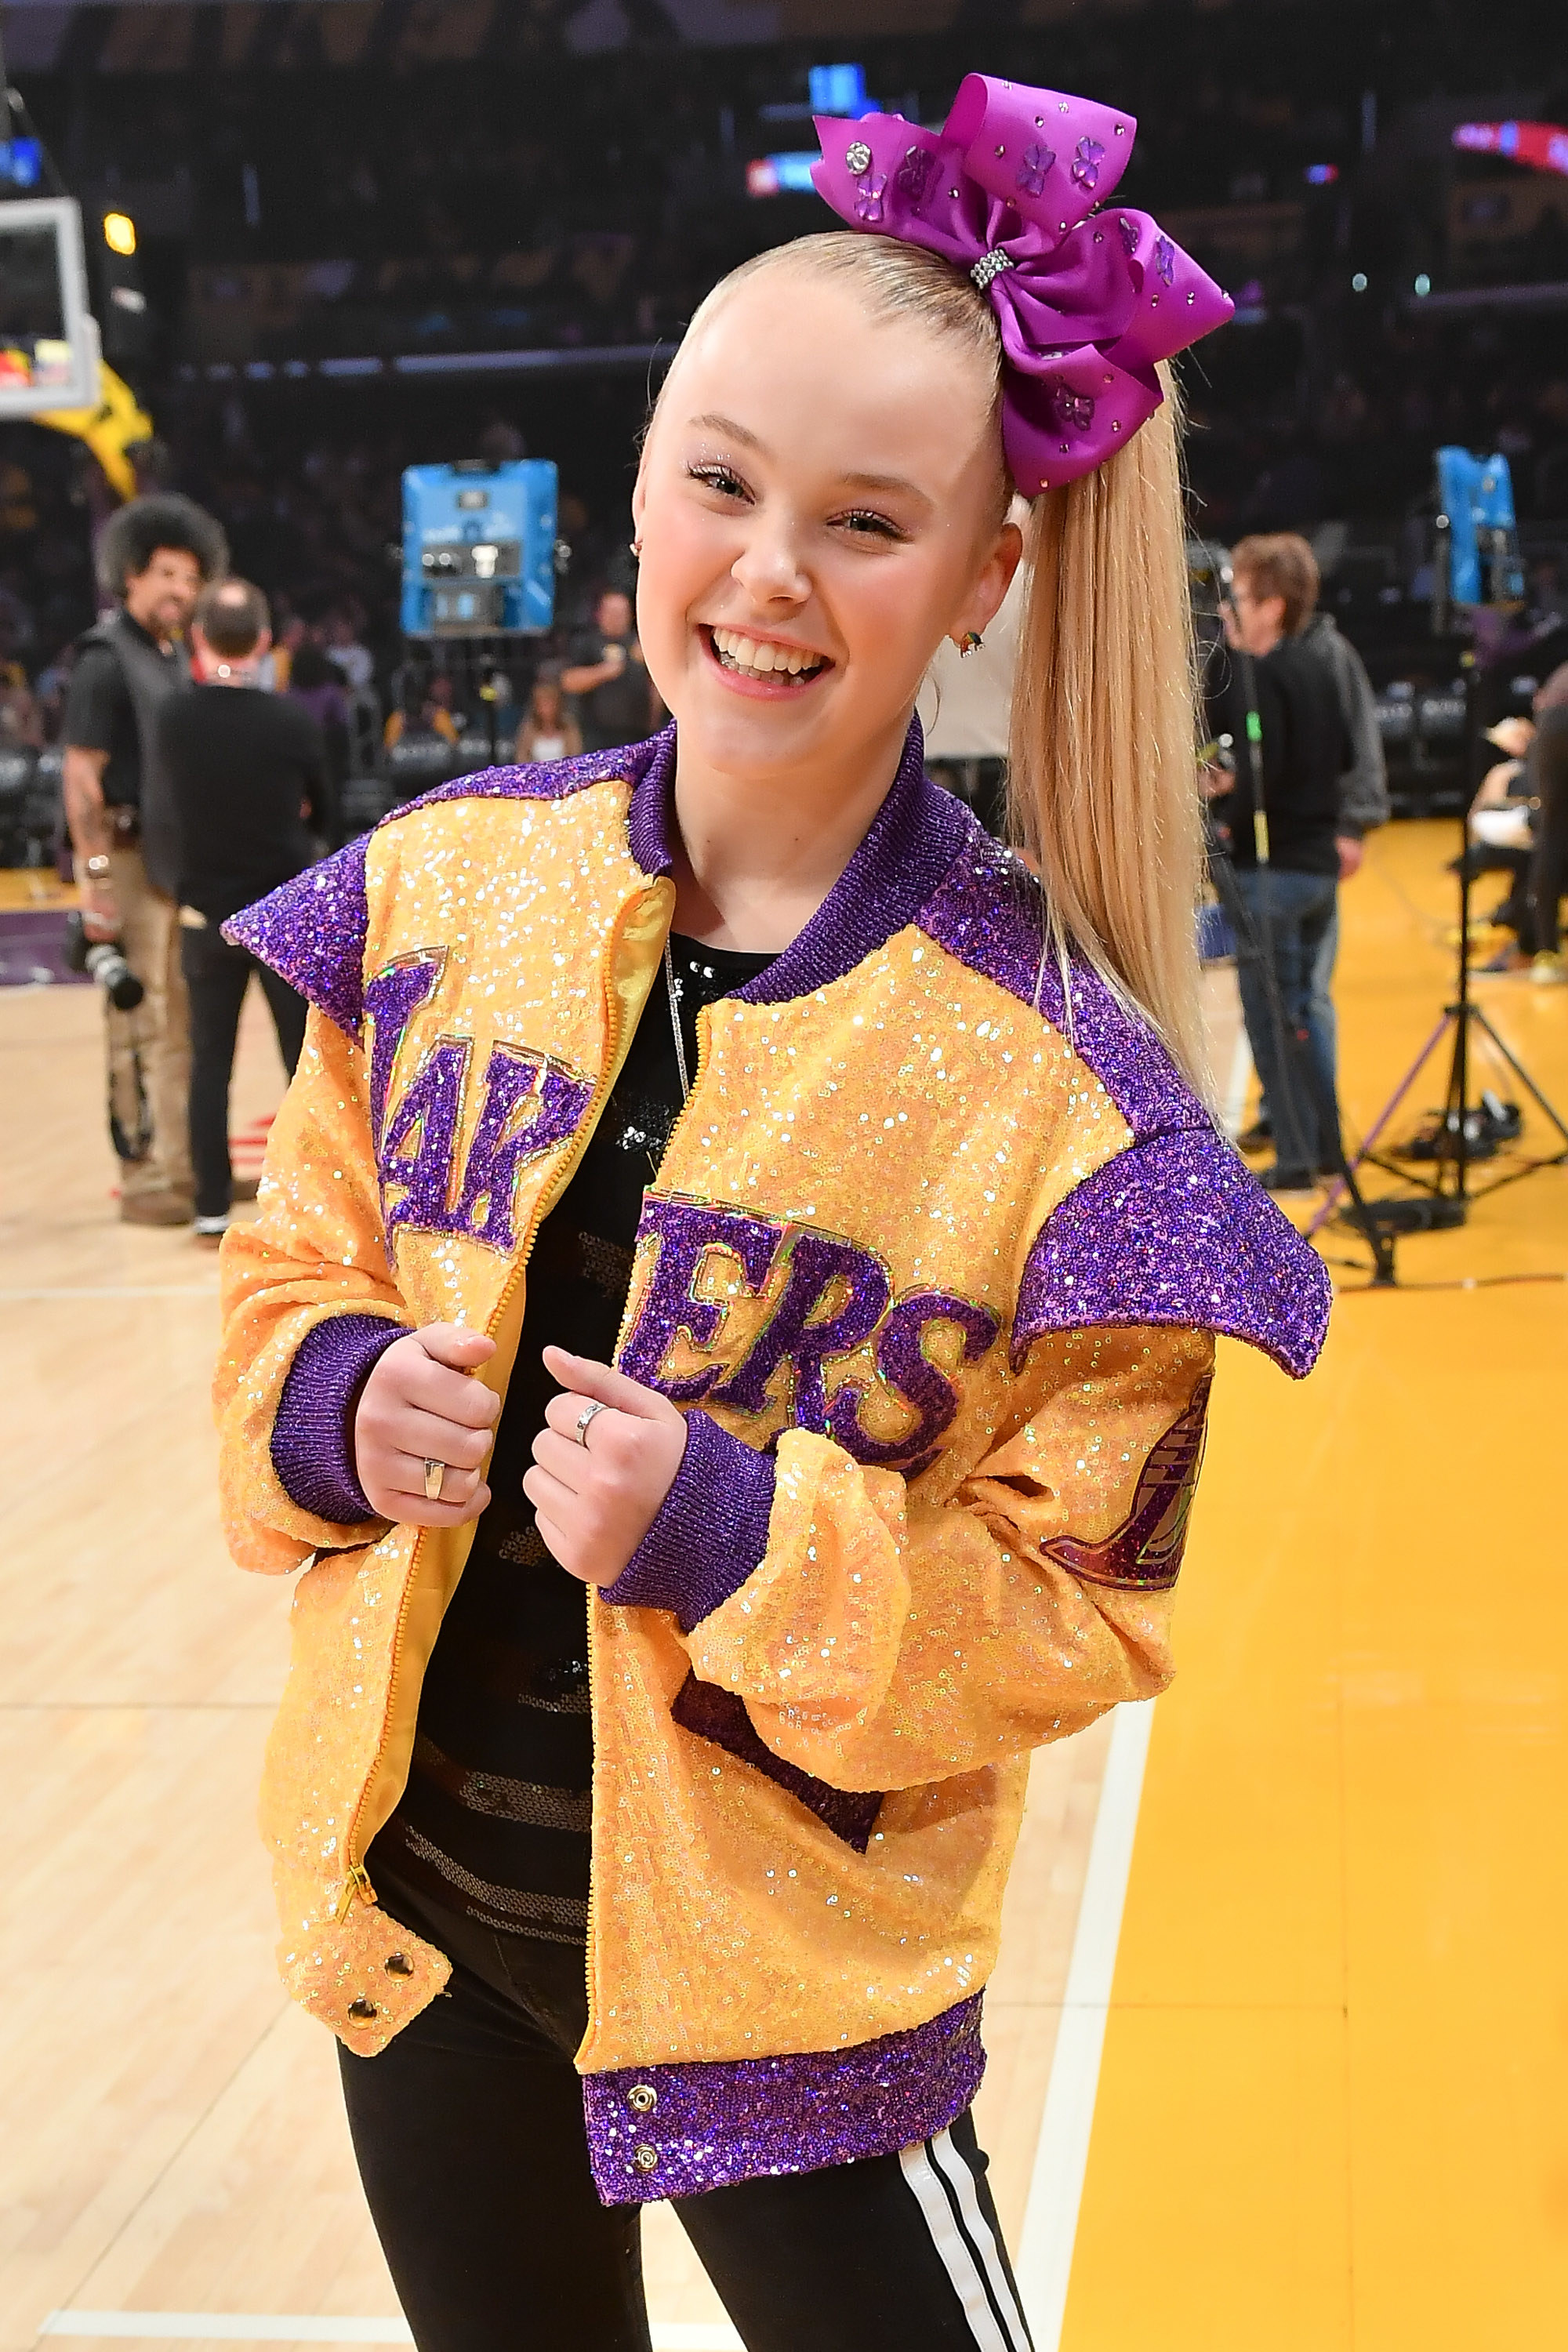 JoJo smiling on the basketball court wearing a sequined Lakers jacket and her signature side ponytail